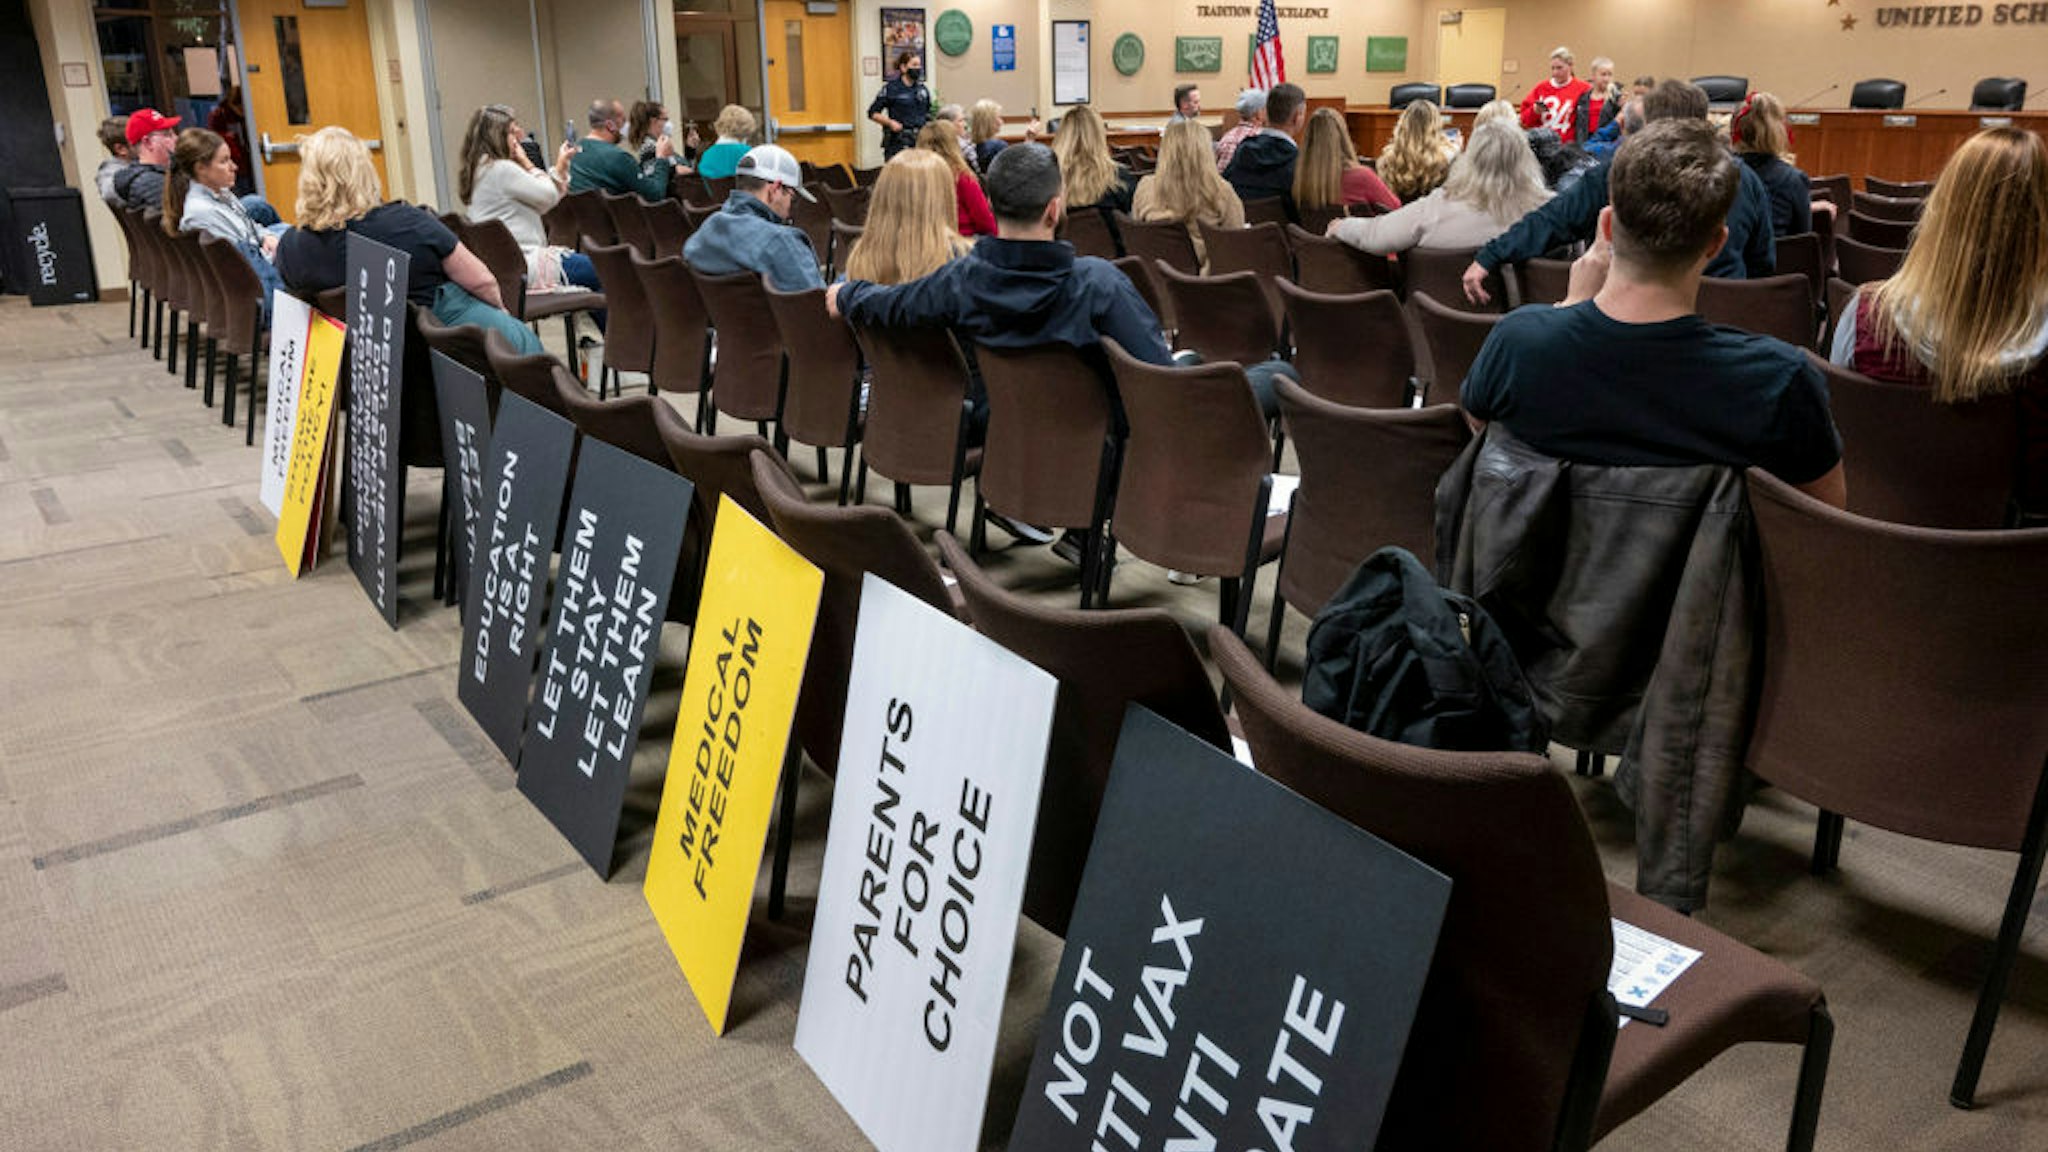 PLACENTIA, CA - JANUARY 19: Protest signs are placed on the back of chairs inside the Placentia-Yorba Linda Unified School District board meeting as parents speak against the mask mandate with trustees Leandra Blades and Shawn Youngblood in an impromptu town hall after board president Carrie Buck canceled the meeting in Placentia on Wednesday, January 19, 2022. The board meeting was also canceled last week after people in the audience refused to wear face masks. (Photo by Leonard Ortiz/MediaNews Group/Orange County Register via Getty Images)